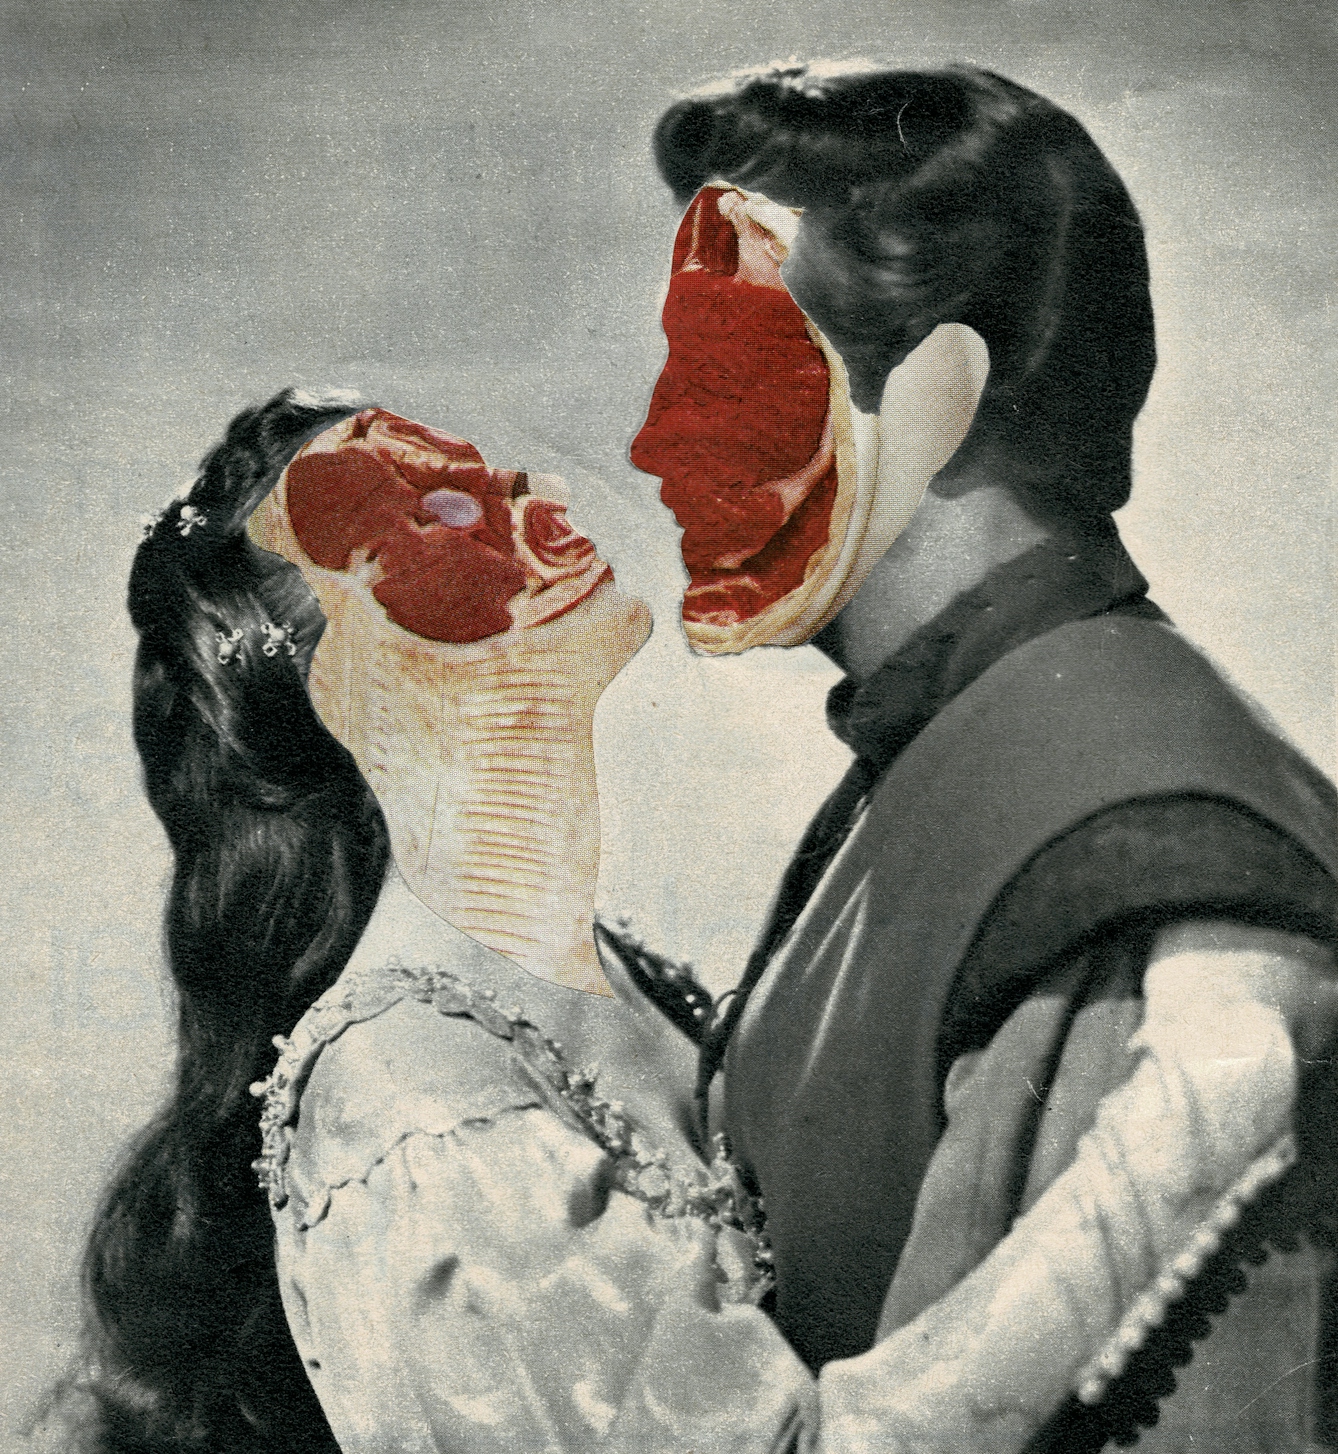 Paper collage artwork of a black and white pair of male and female lovers as they embrace.  Their facial features have been replaced with full colour set of cured meats, following the profile of their faces.